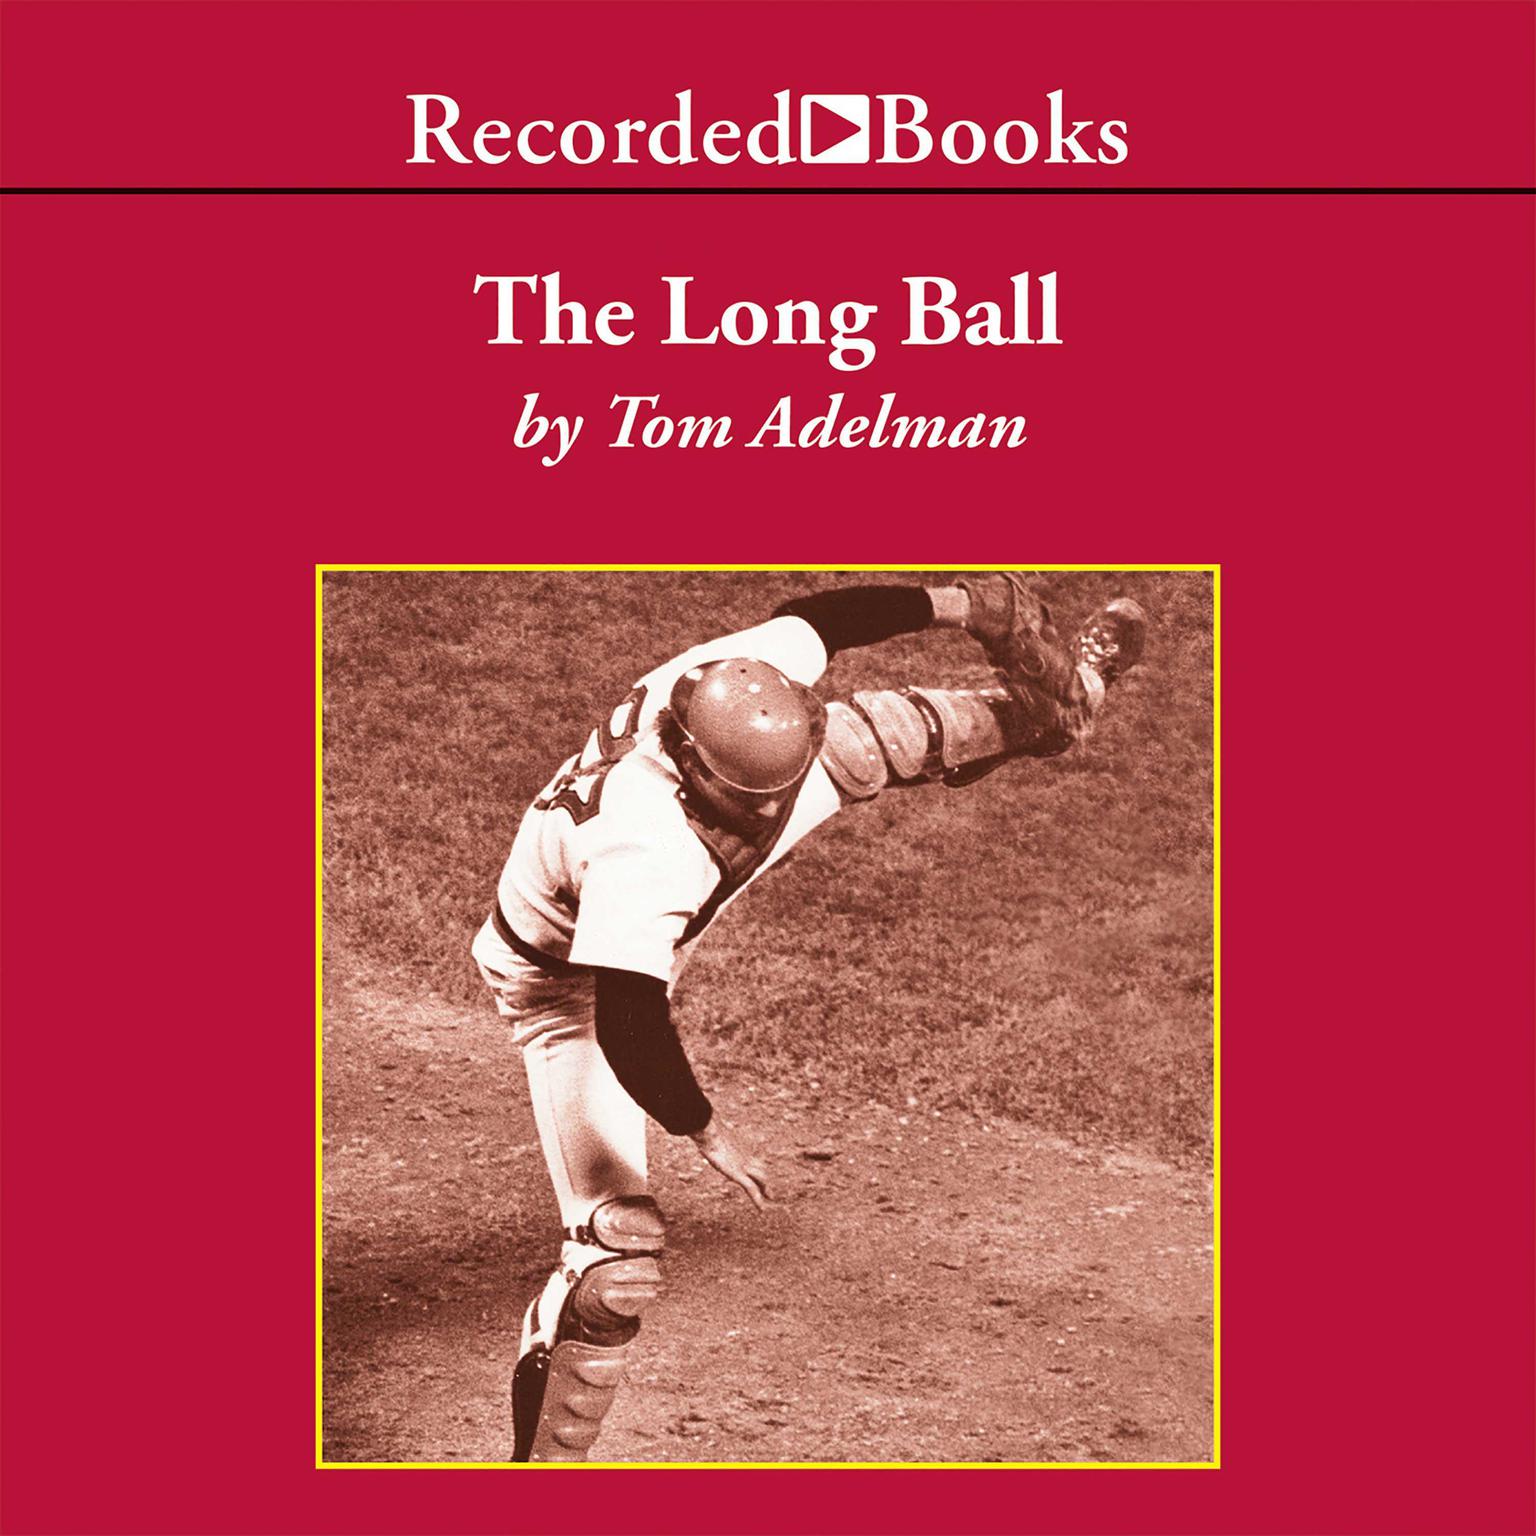 The Long Ball: The Summer of ‘75—Spaceman, Catfish, Charlie Hustle, and the Greatest World Series Ever Played Audiobook, by Tom Adelman